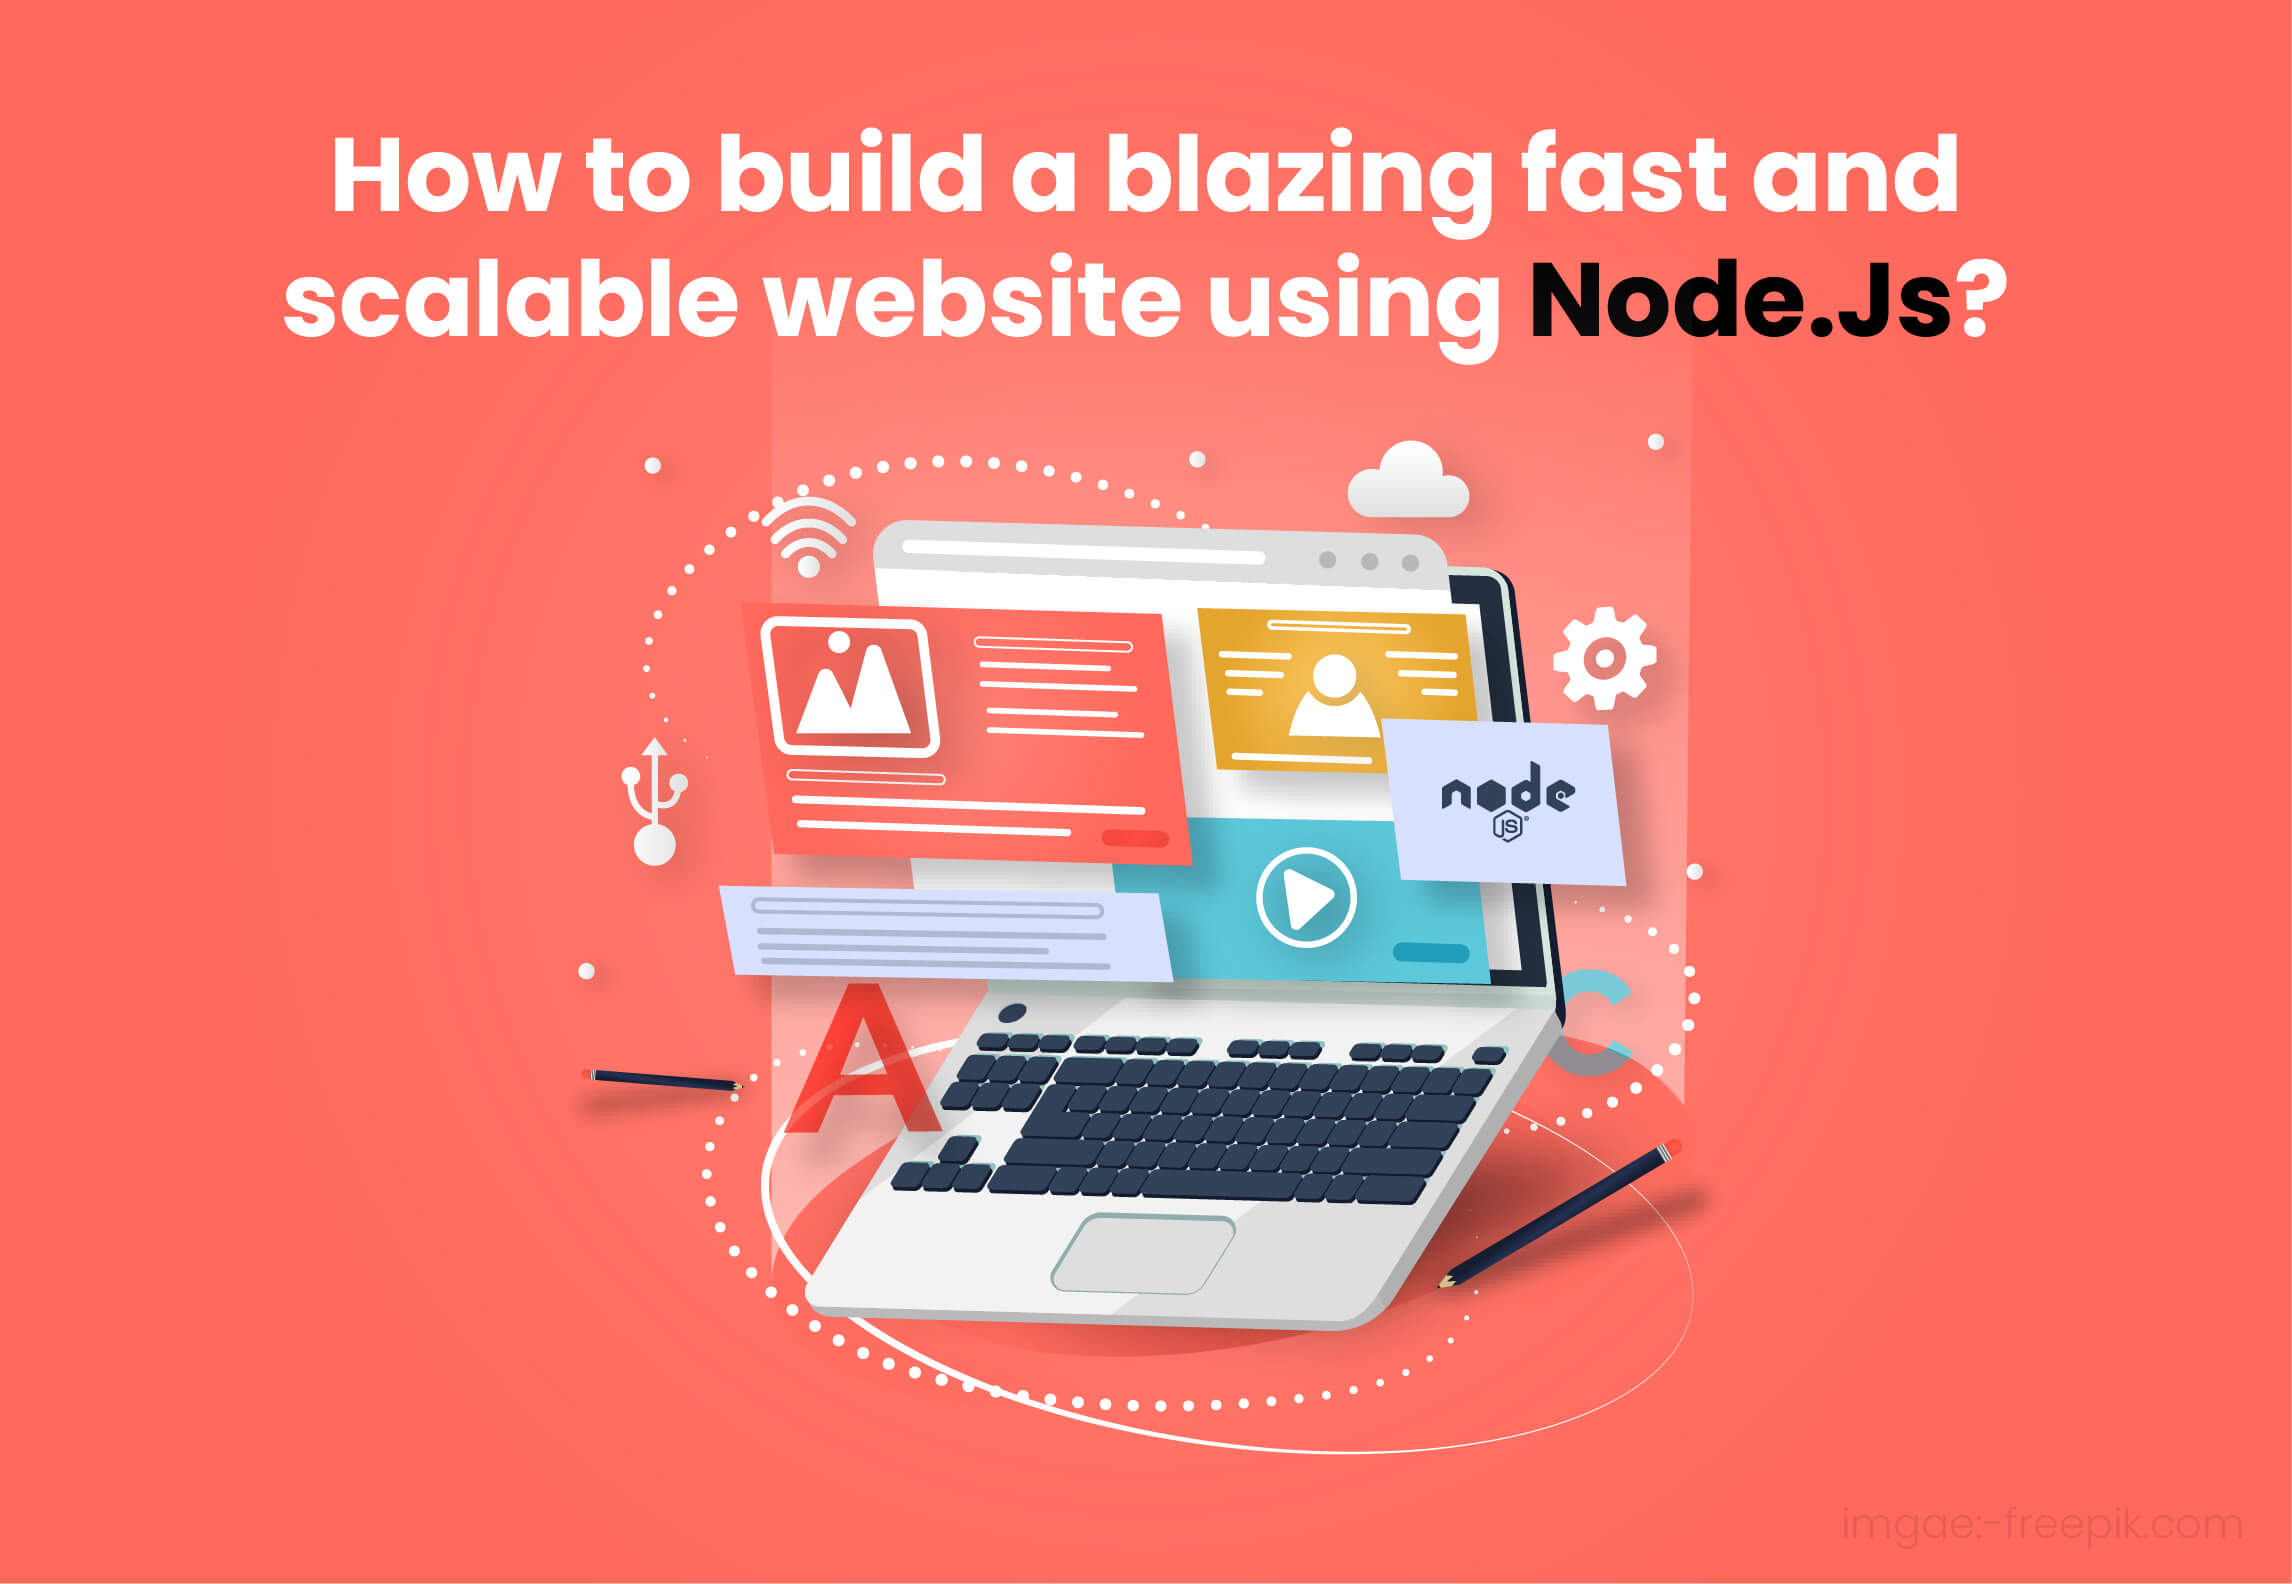 How to Build a Blazing Fast and Scalable Website Using Node.js?